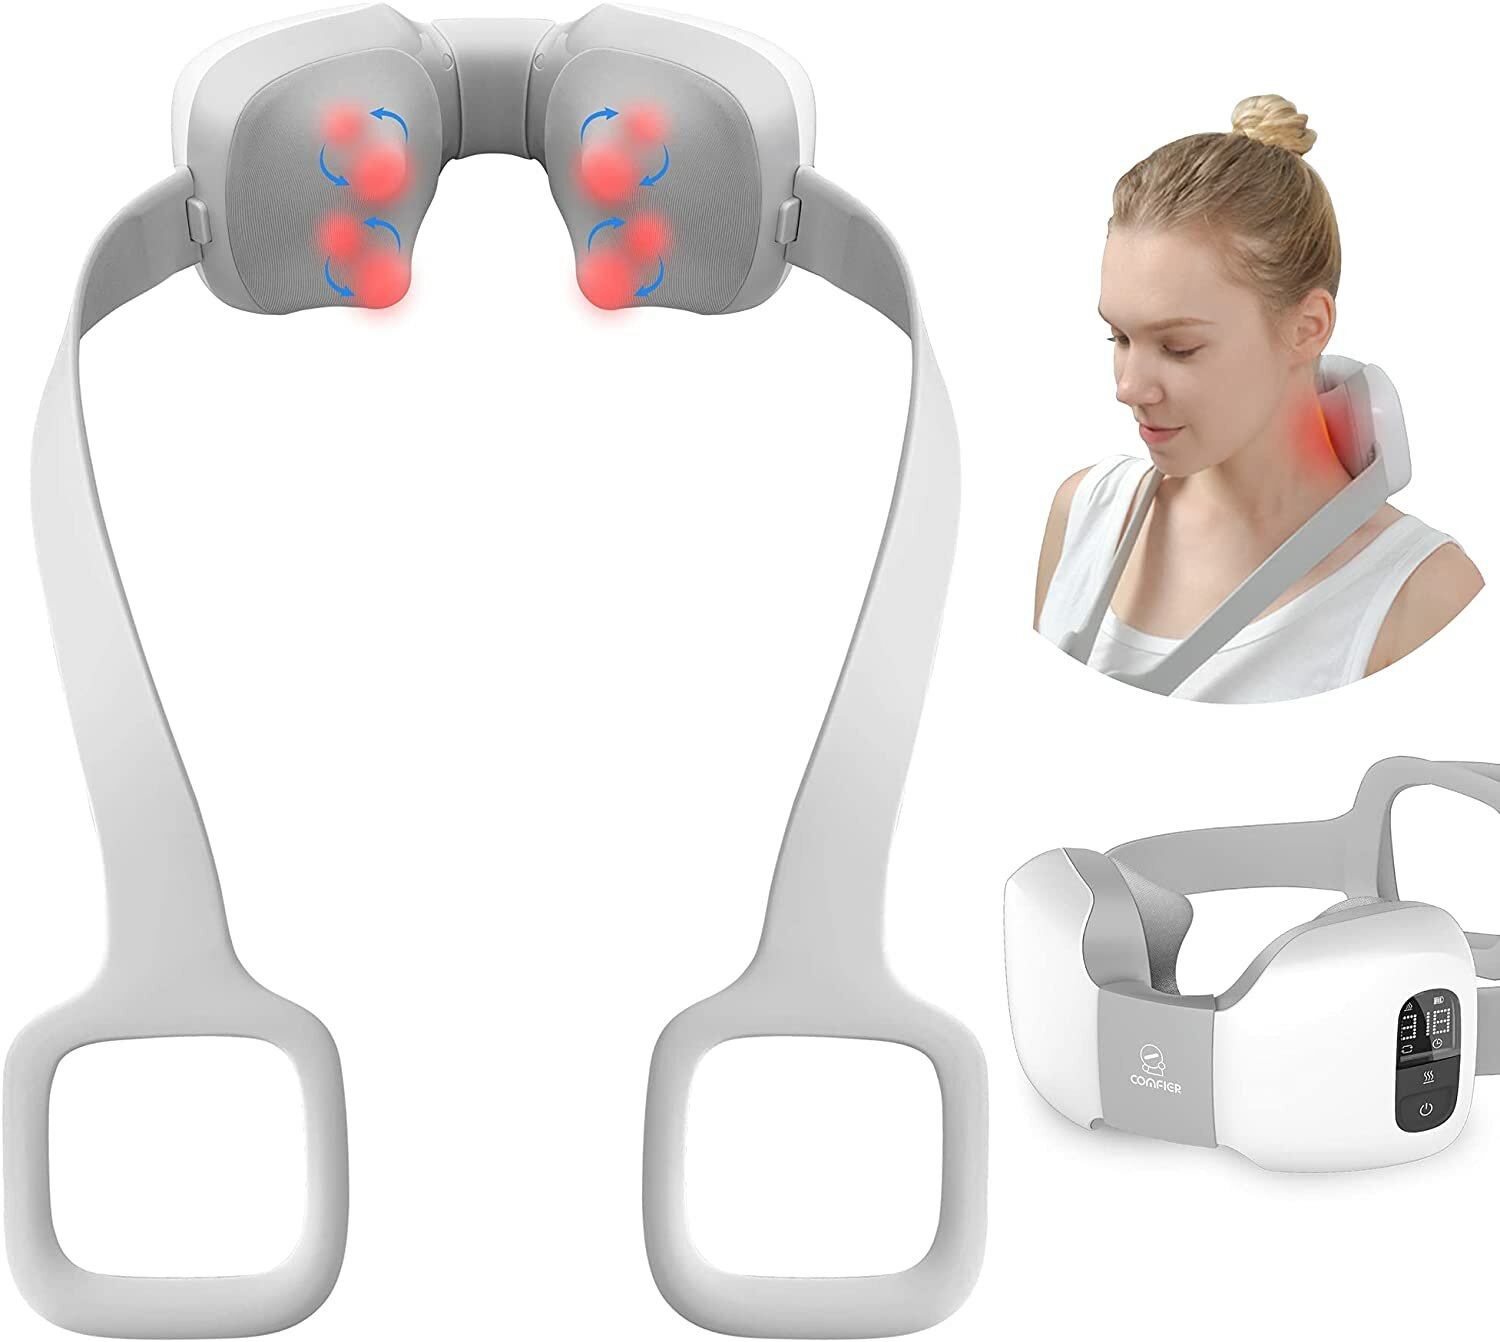 4 Modes Comfier Heat Shiatsu Neck Massager Cordless for Pain Relief LCD Display Portable Neck Massag